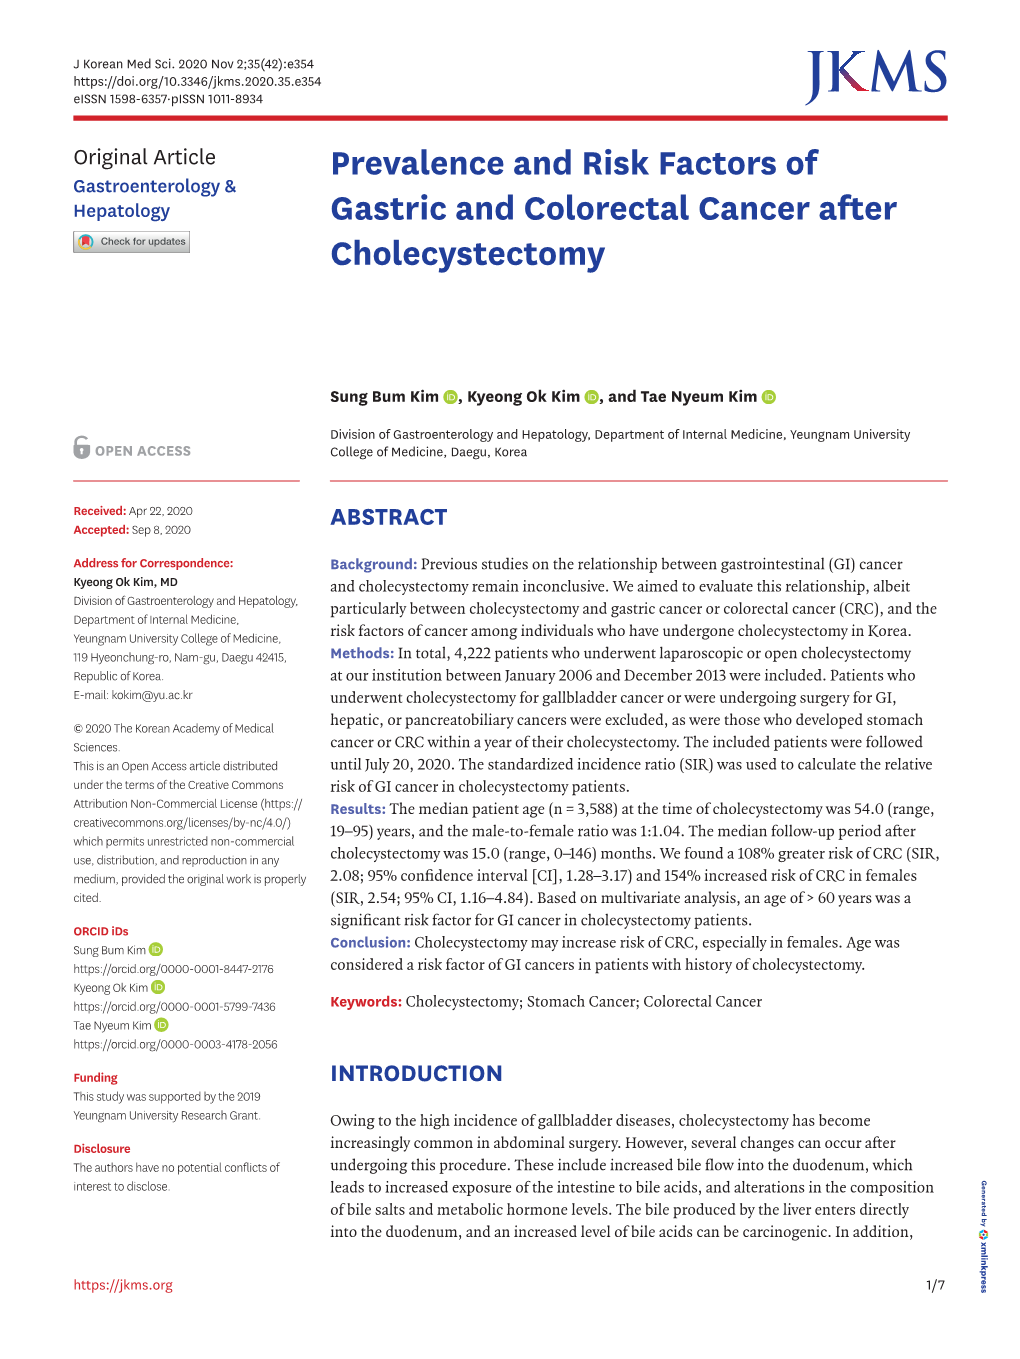 Prevalence and Risk Factors of Gastric and Colorectal Cancer After